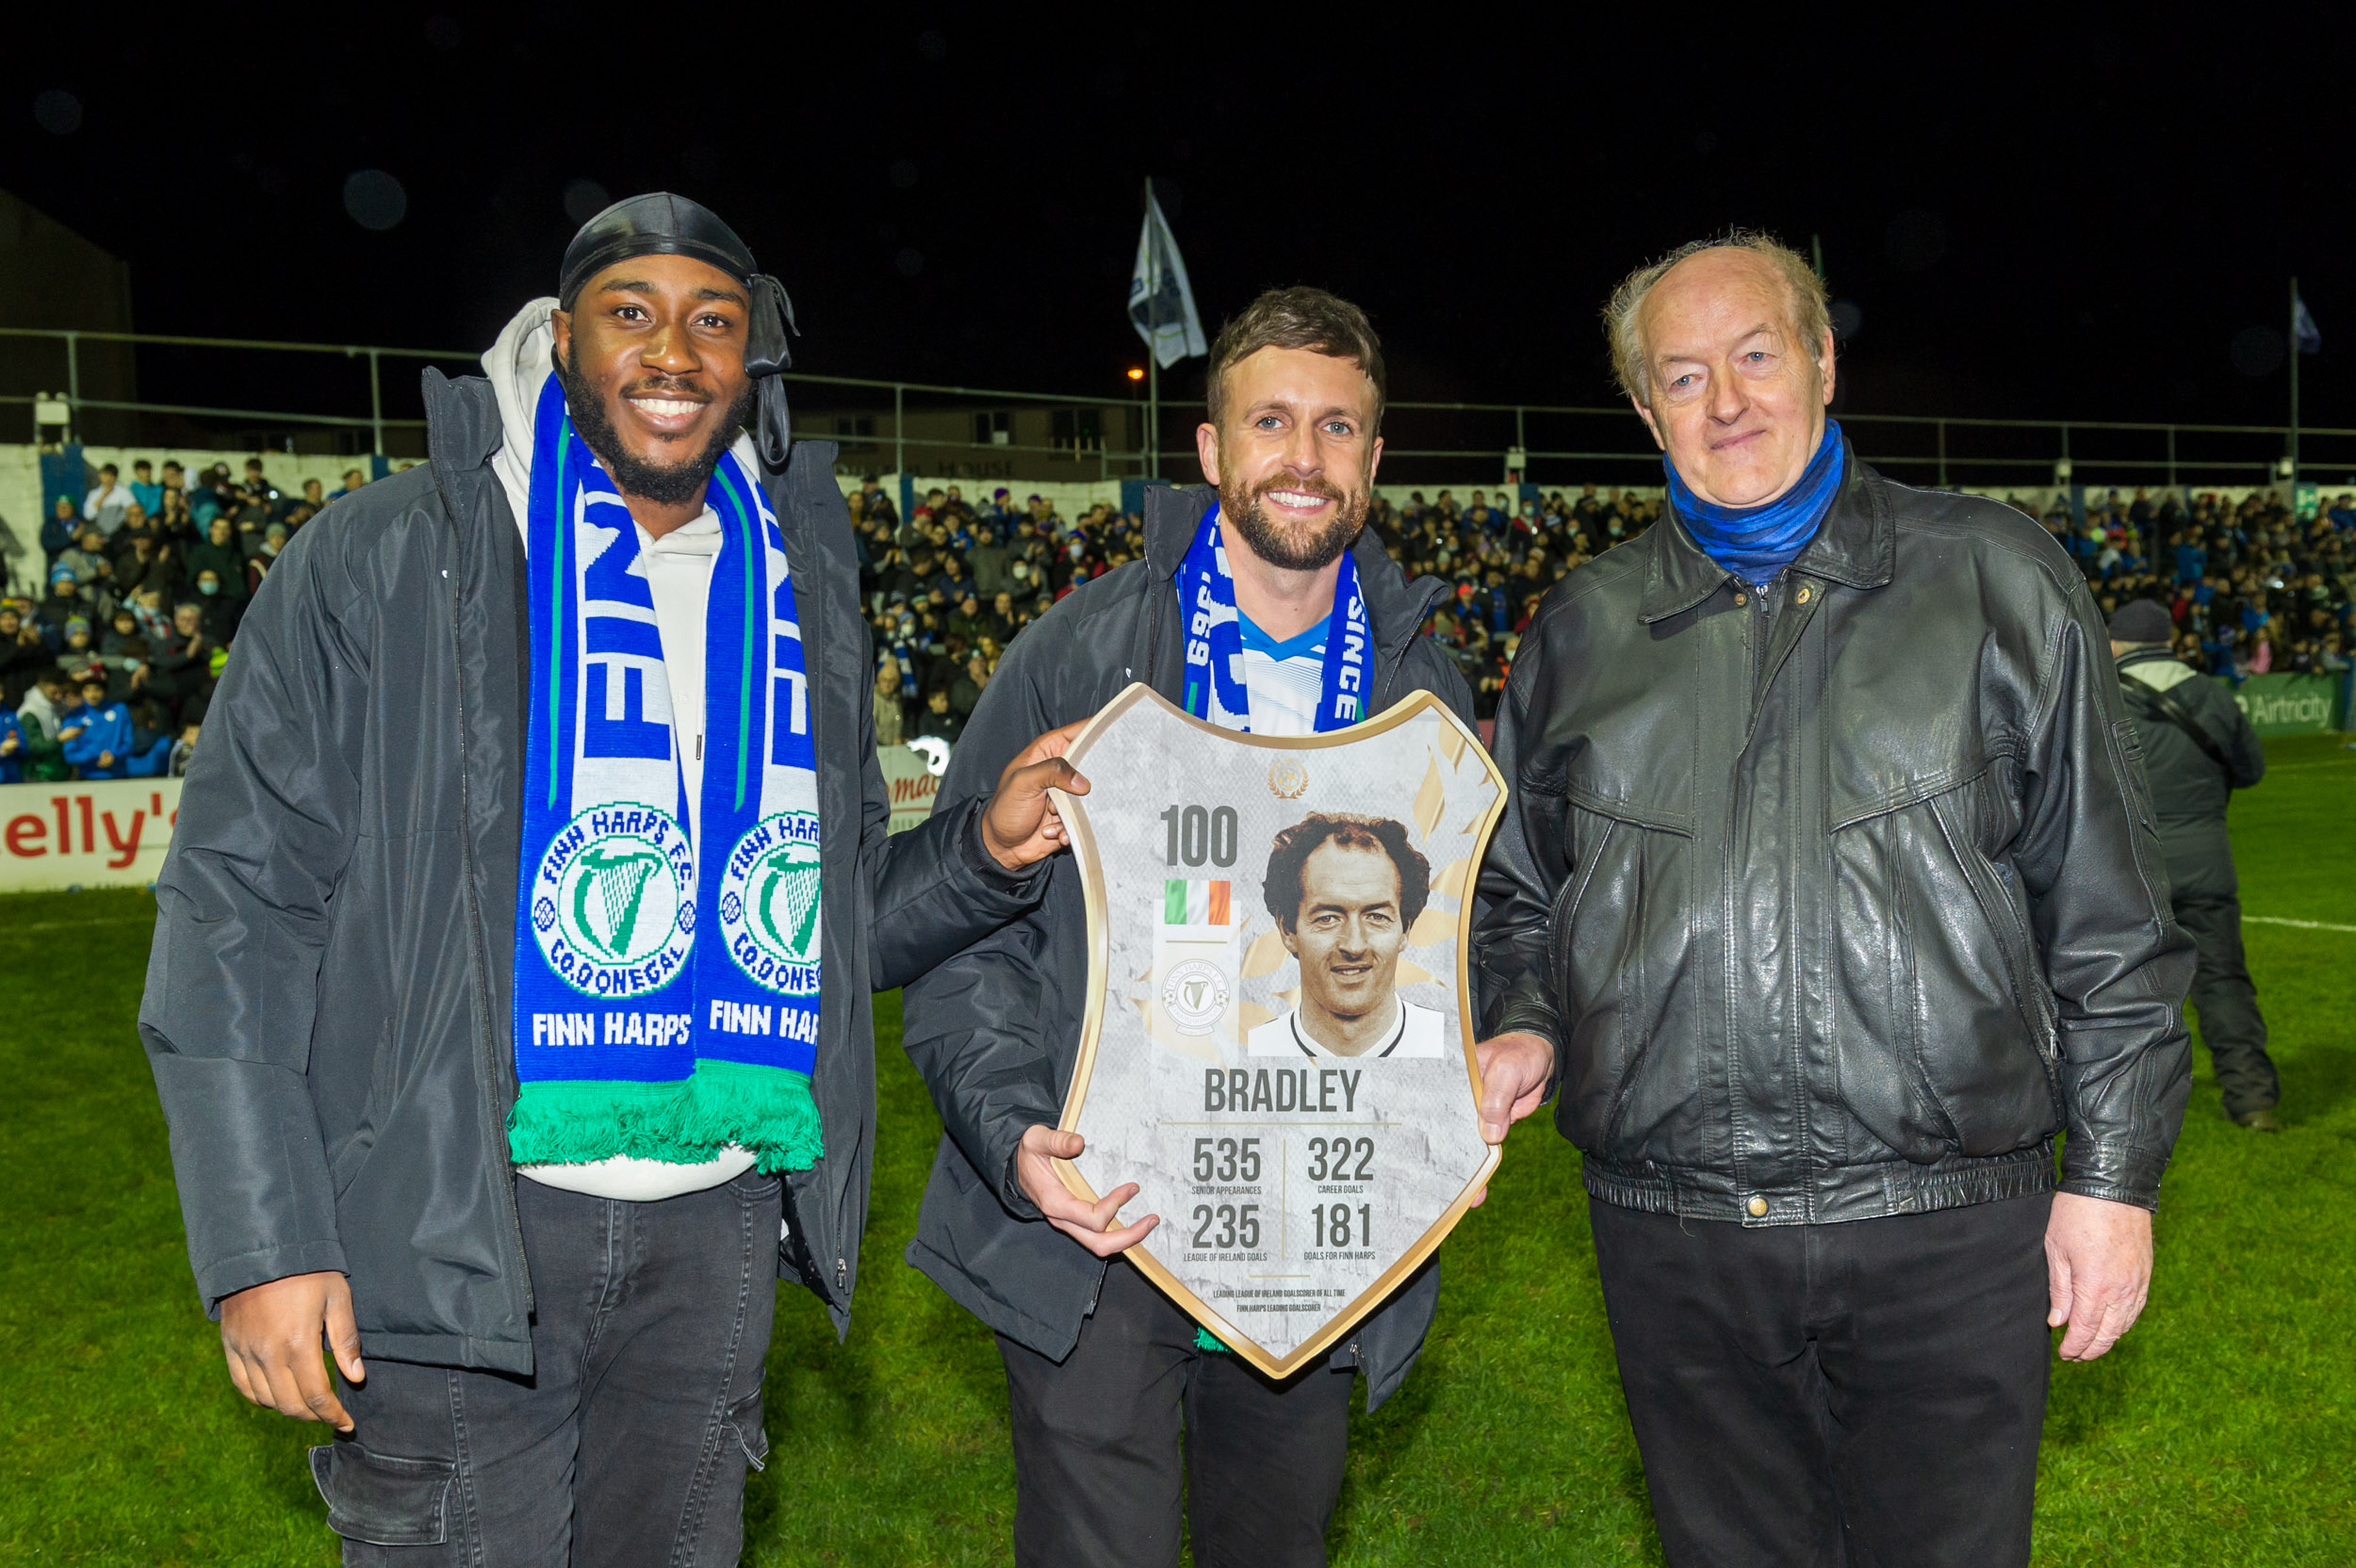 We were honoured to have League of Ireland and Finn Harps legend Brendan Bradley as our guest of honour on Friday night. He was presented with a unique FIFA shield by our friends at Guild at half-time!